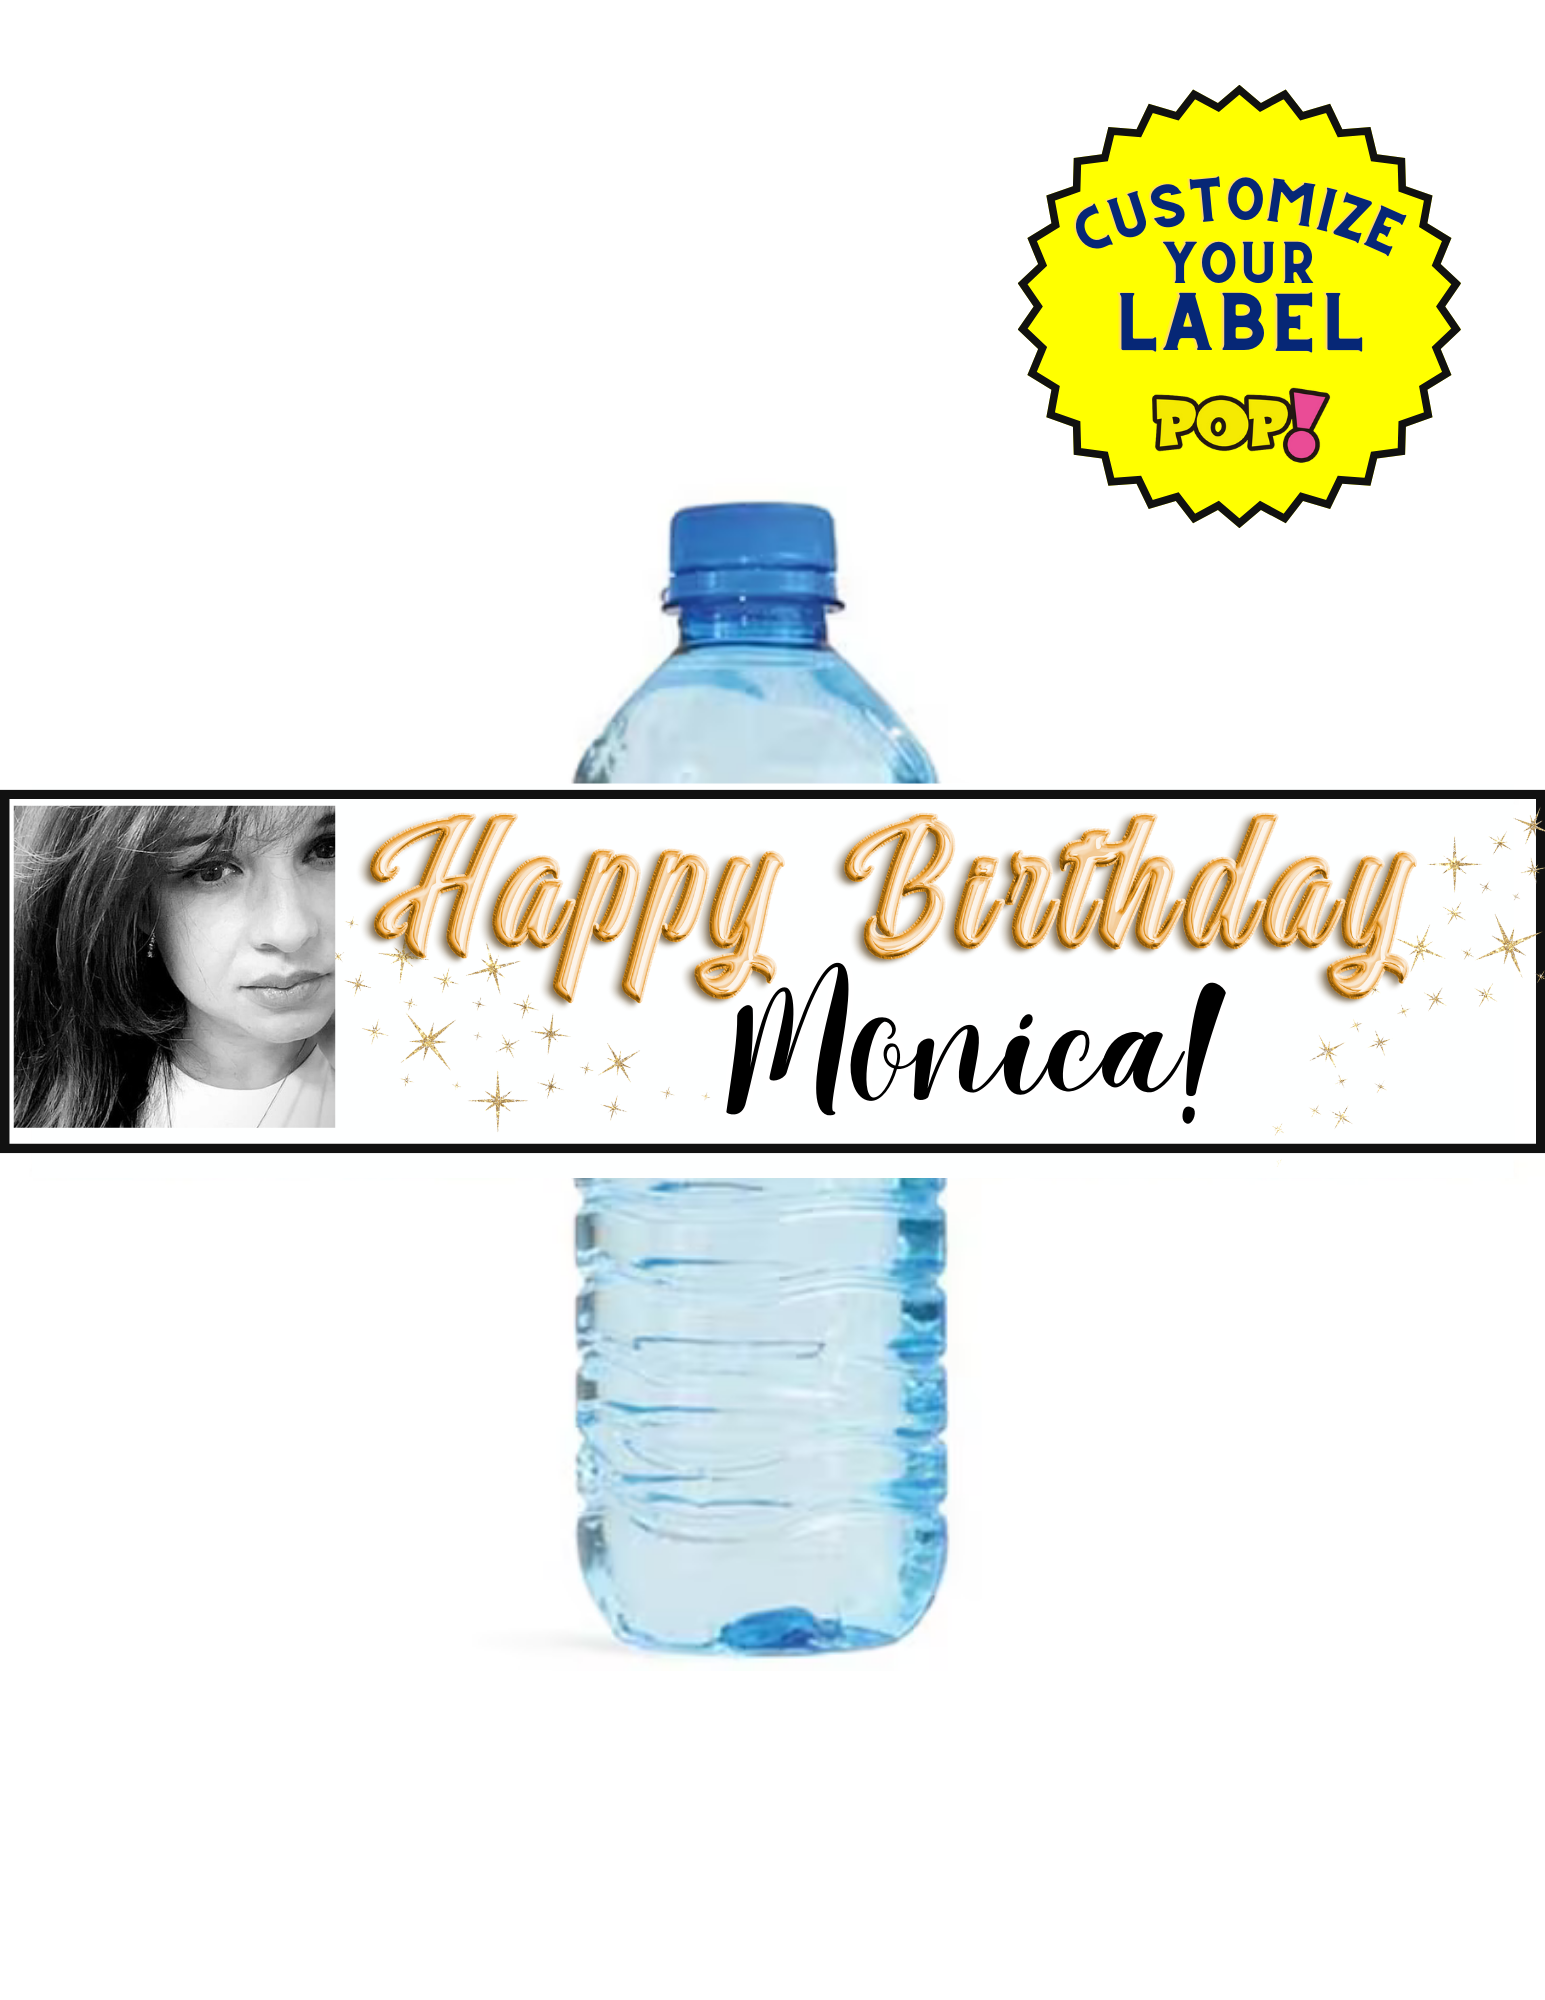 Custom Water Bottle Labels - Use Your Design - POPPartyballoons